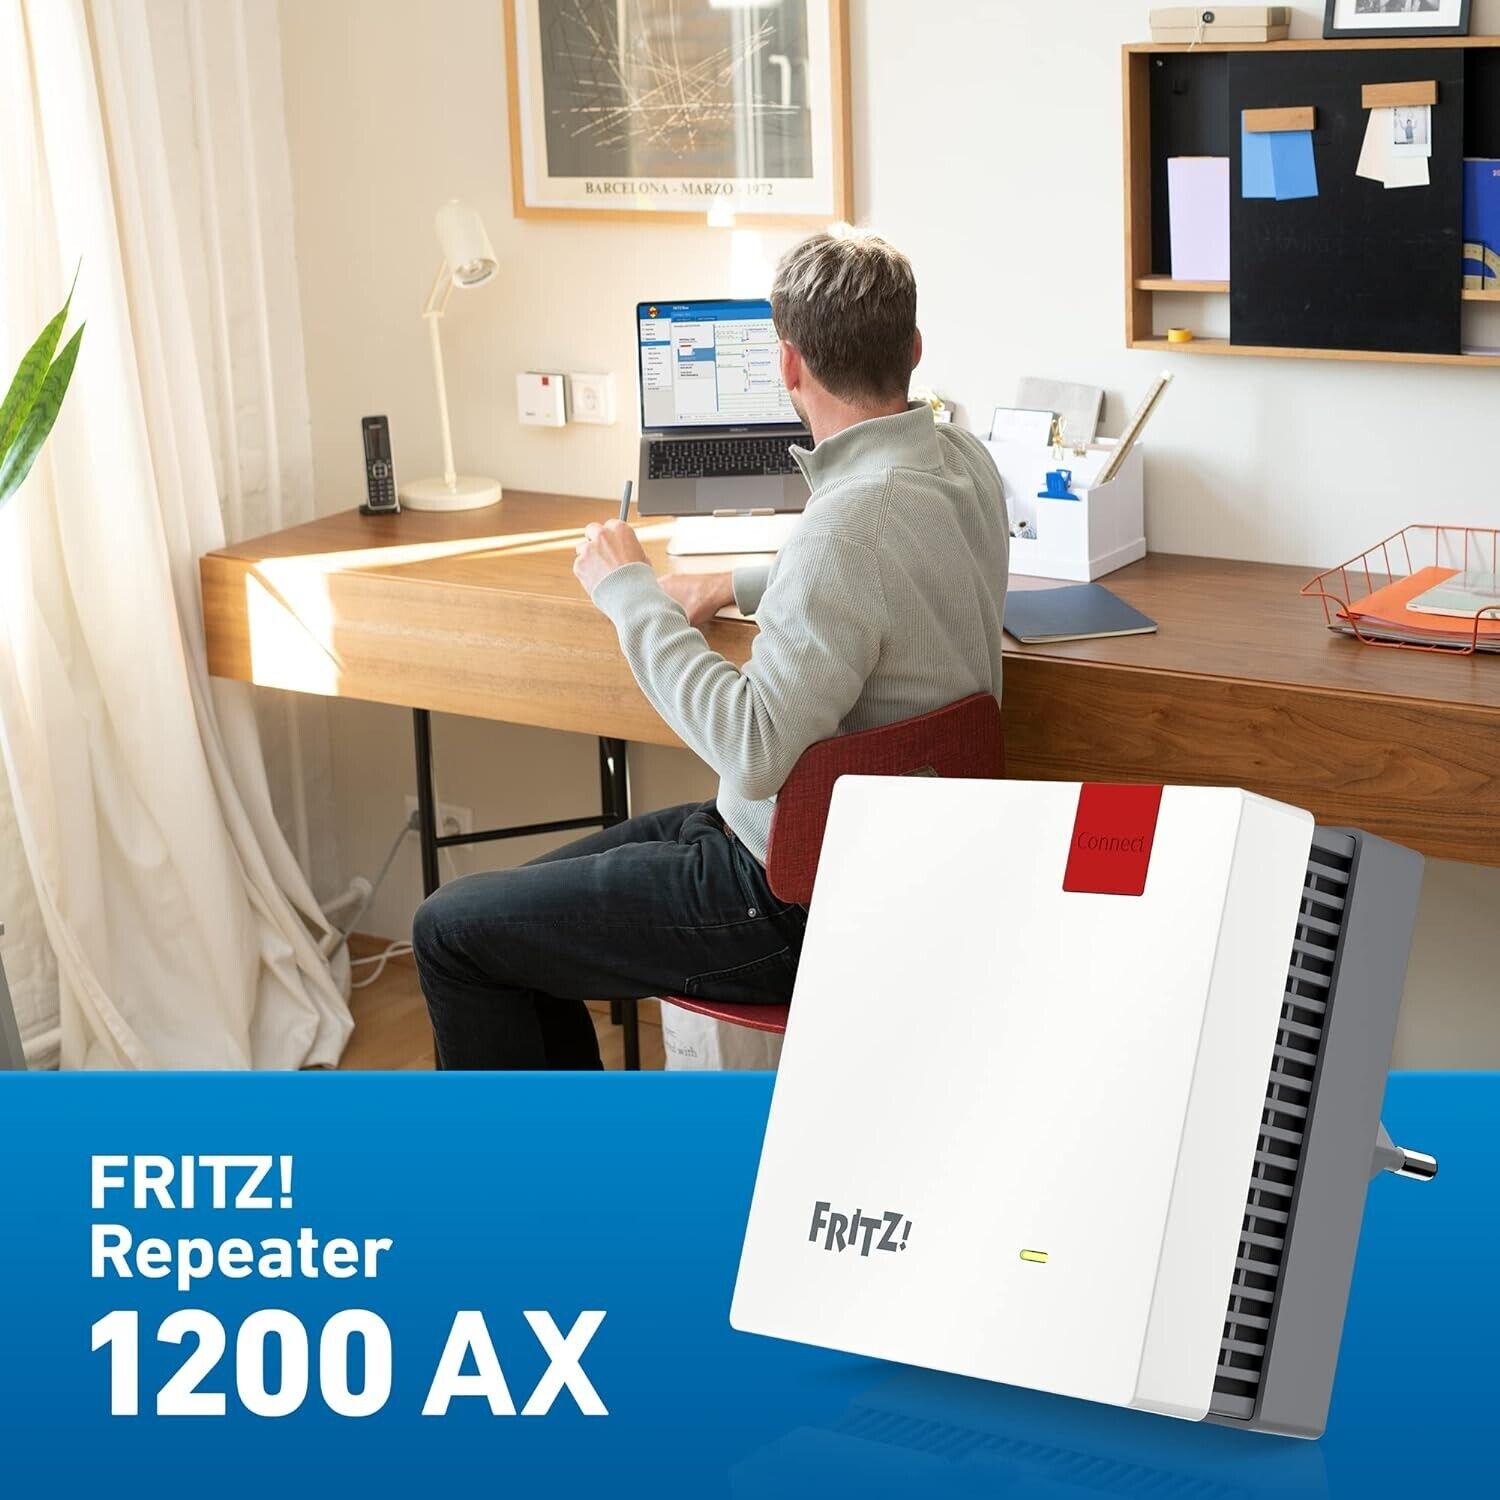 FRITZ Repeater 1200 AX (Wi-Fi 6 Repeater 5 GHz band (up to 2,400 Mbps) Single